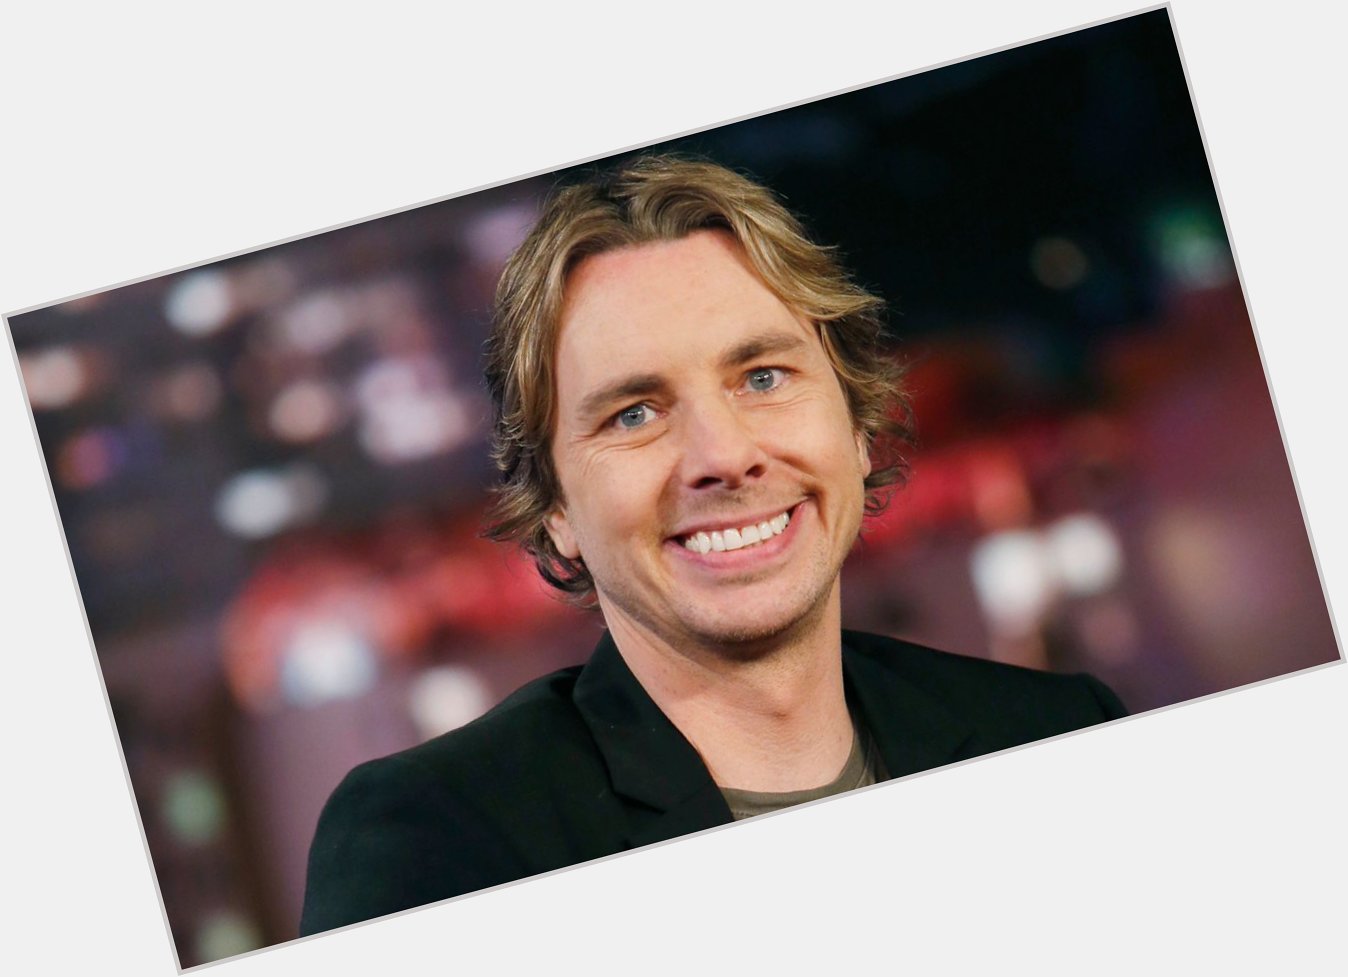 \"You only get one chance at your life so why not jump cars?\"

Happy birthday to Dax Shepard! 